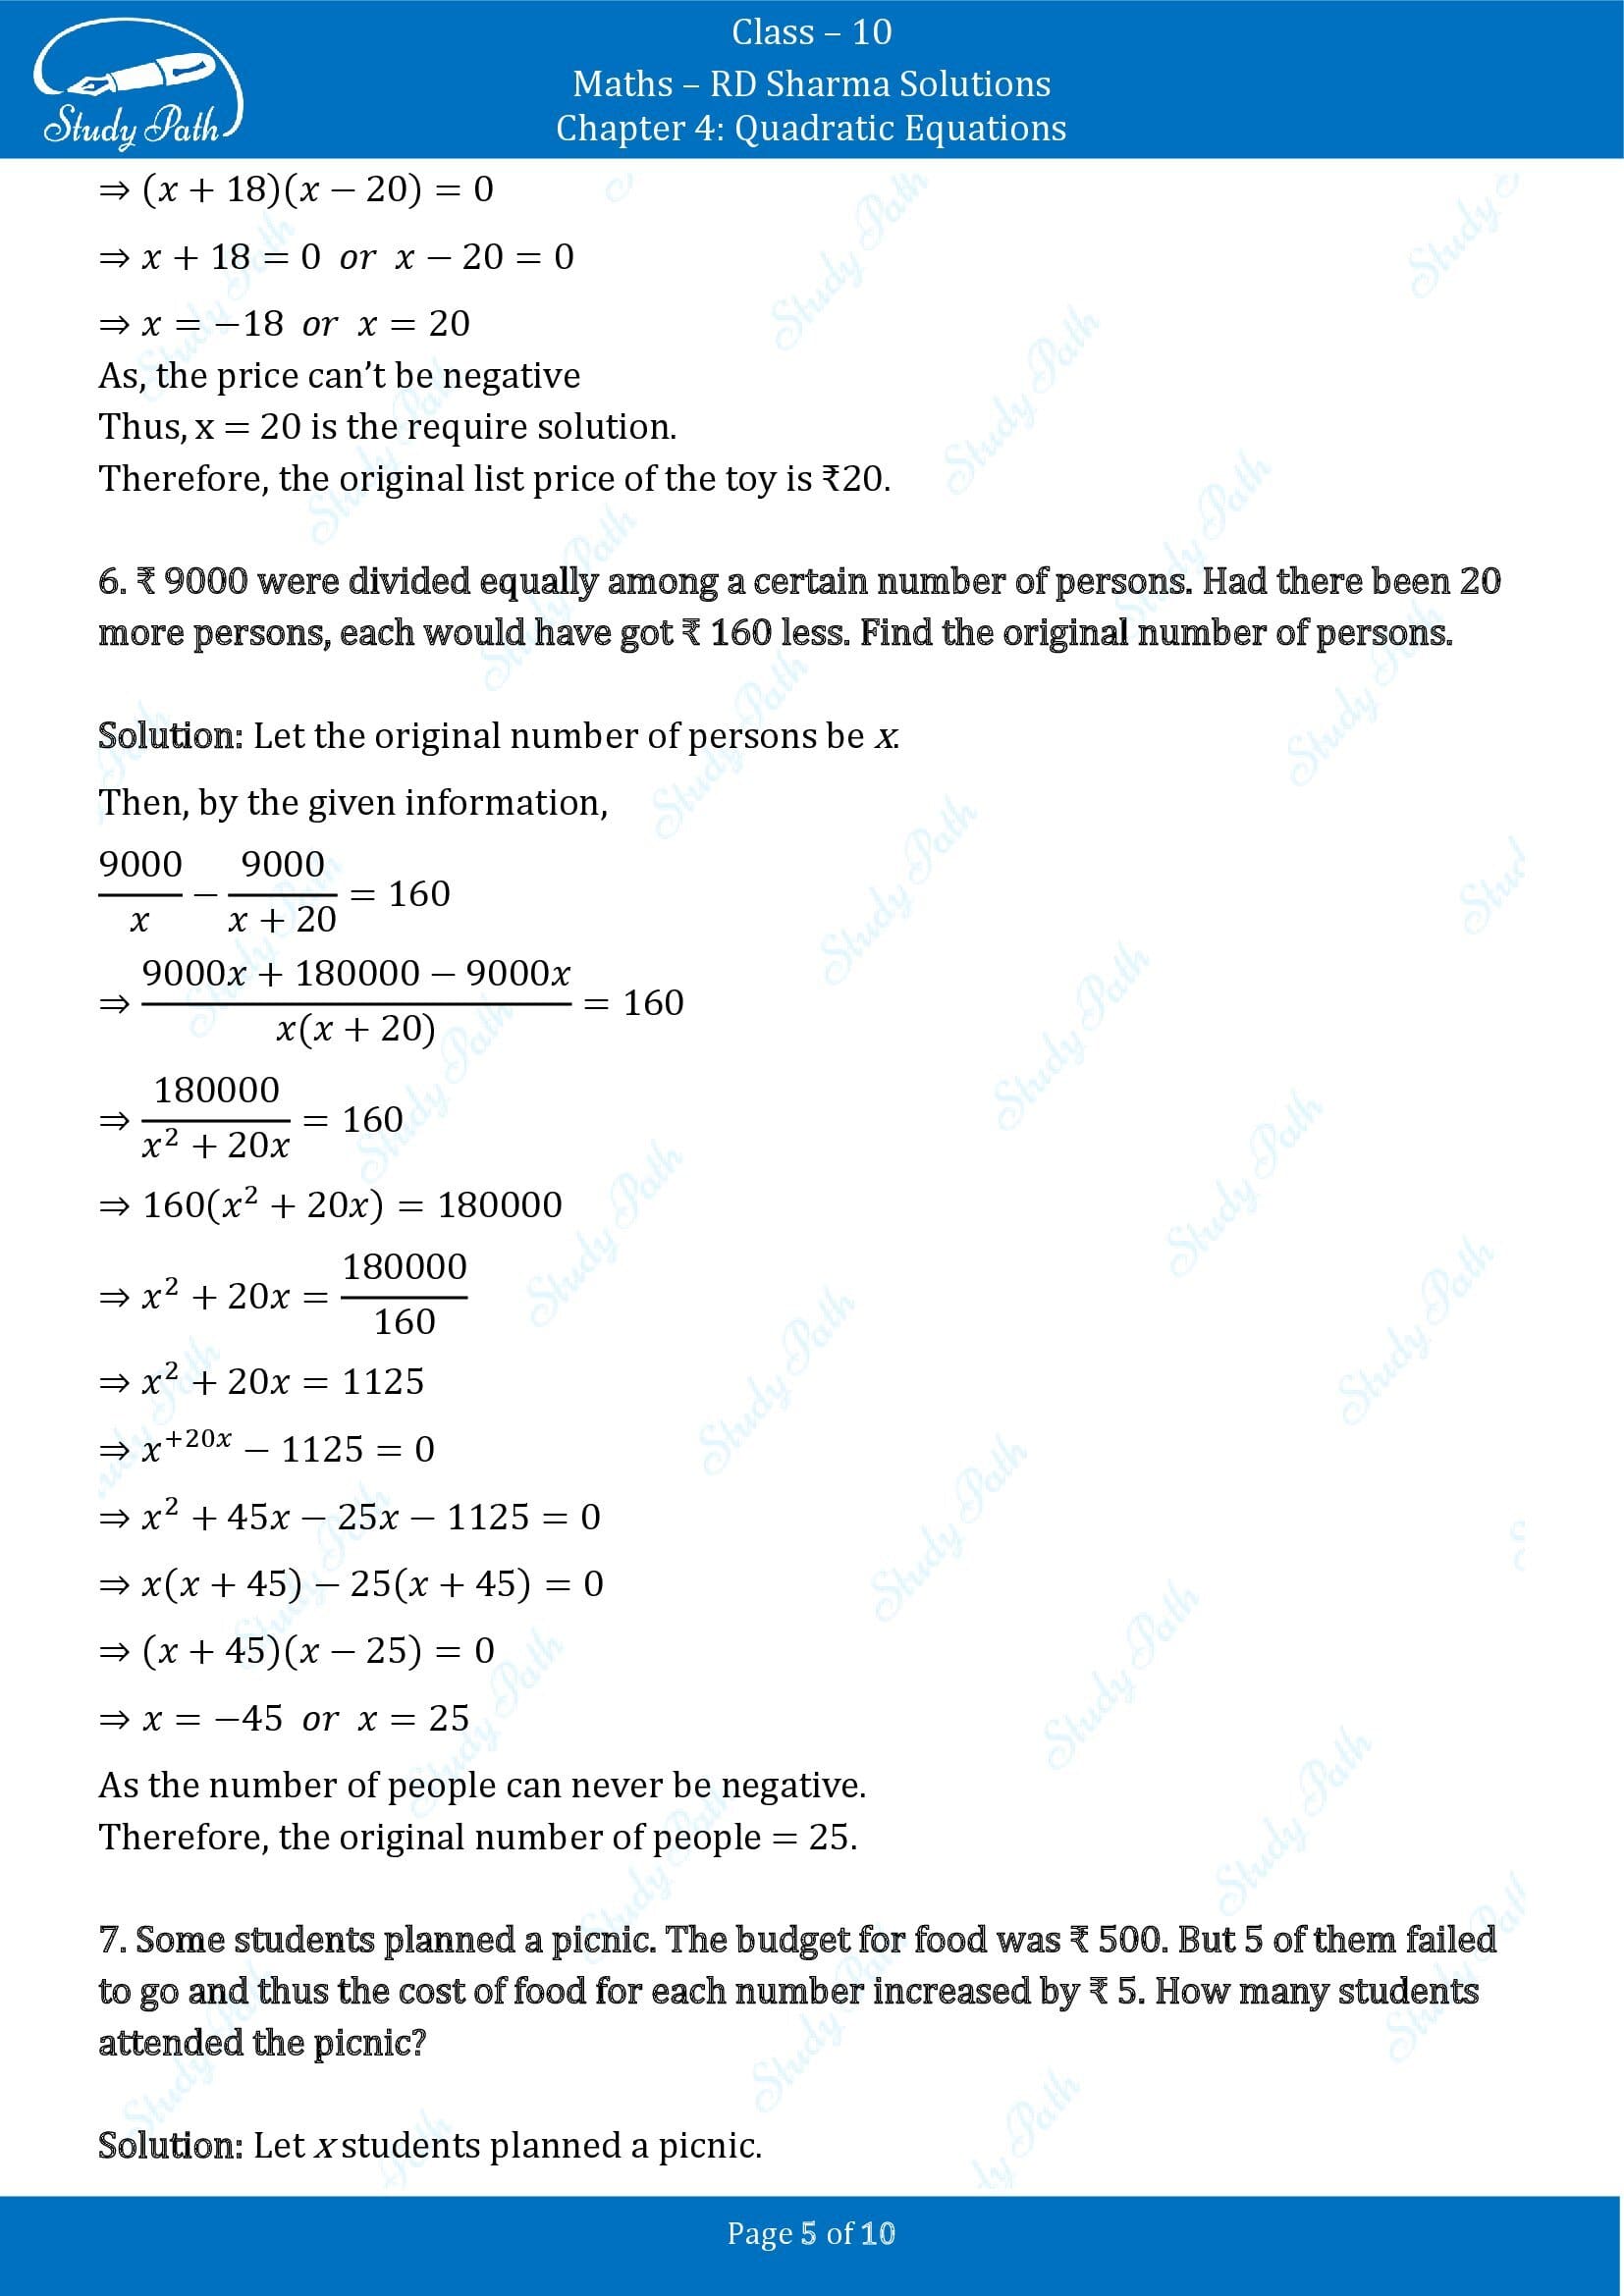 RD Sharma Solutions Class 10 Chapter 4 Quadratic Equations Exercise 4.13 00005